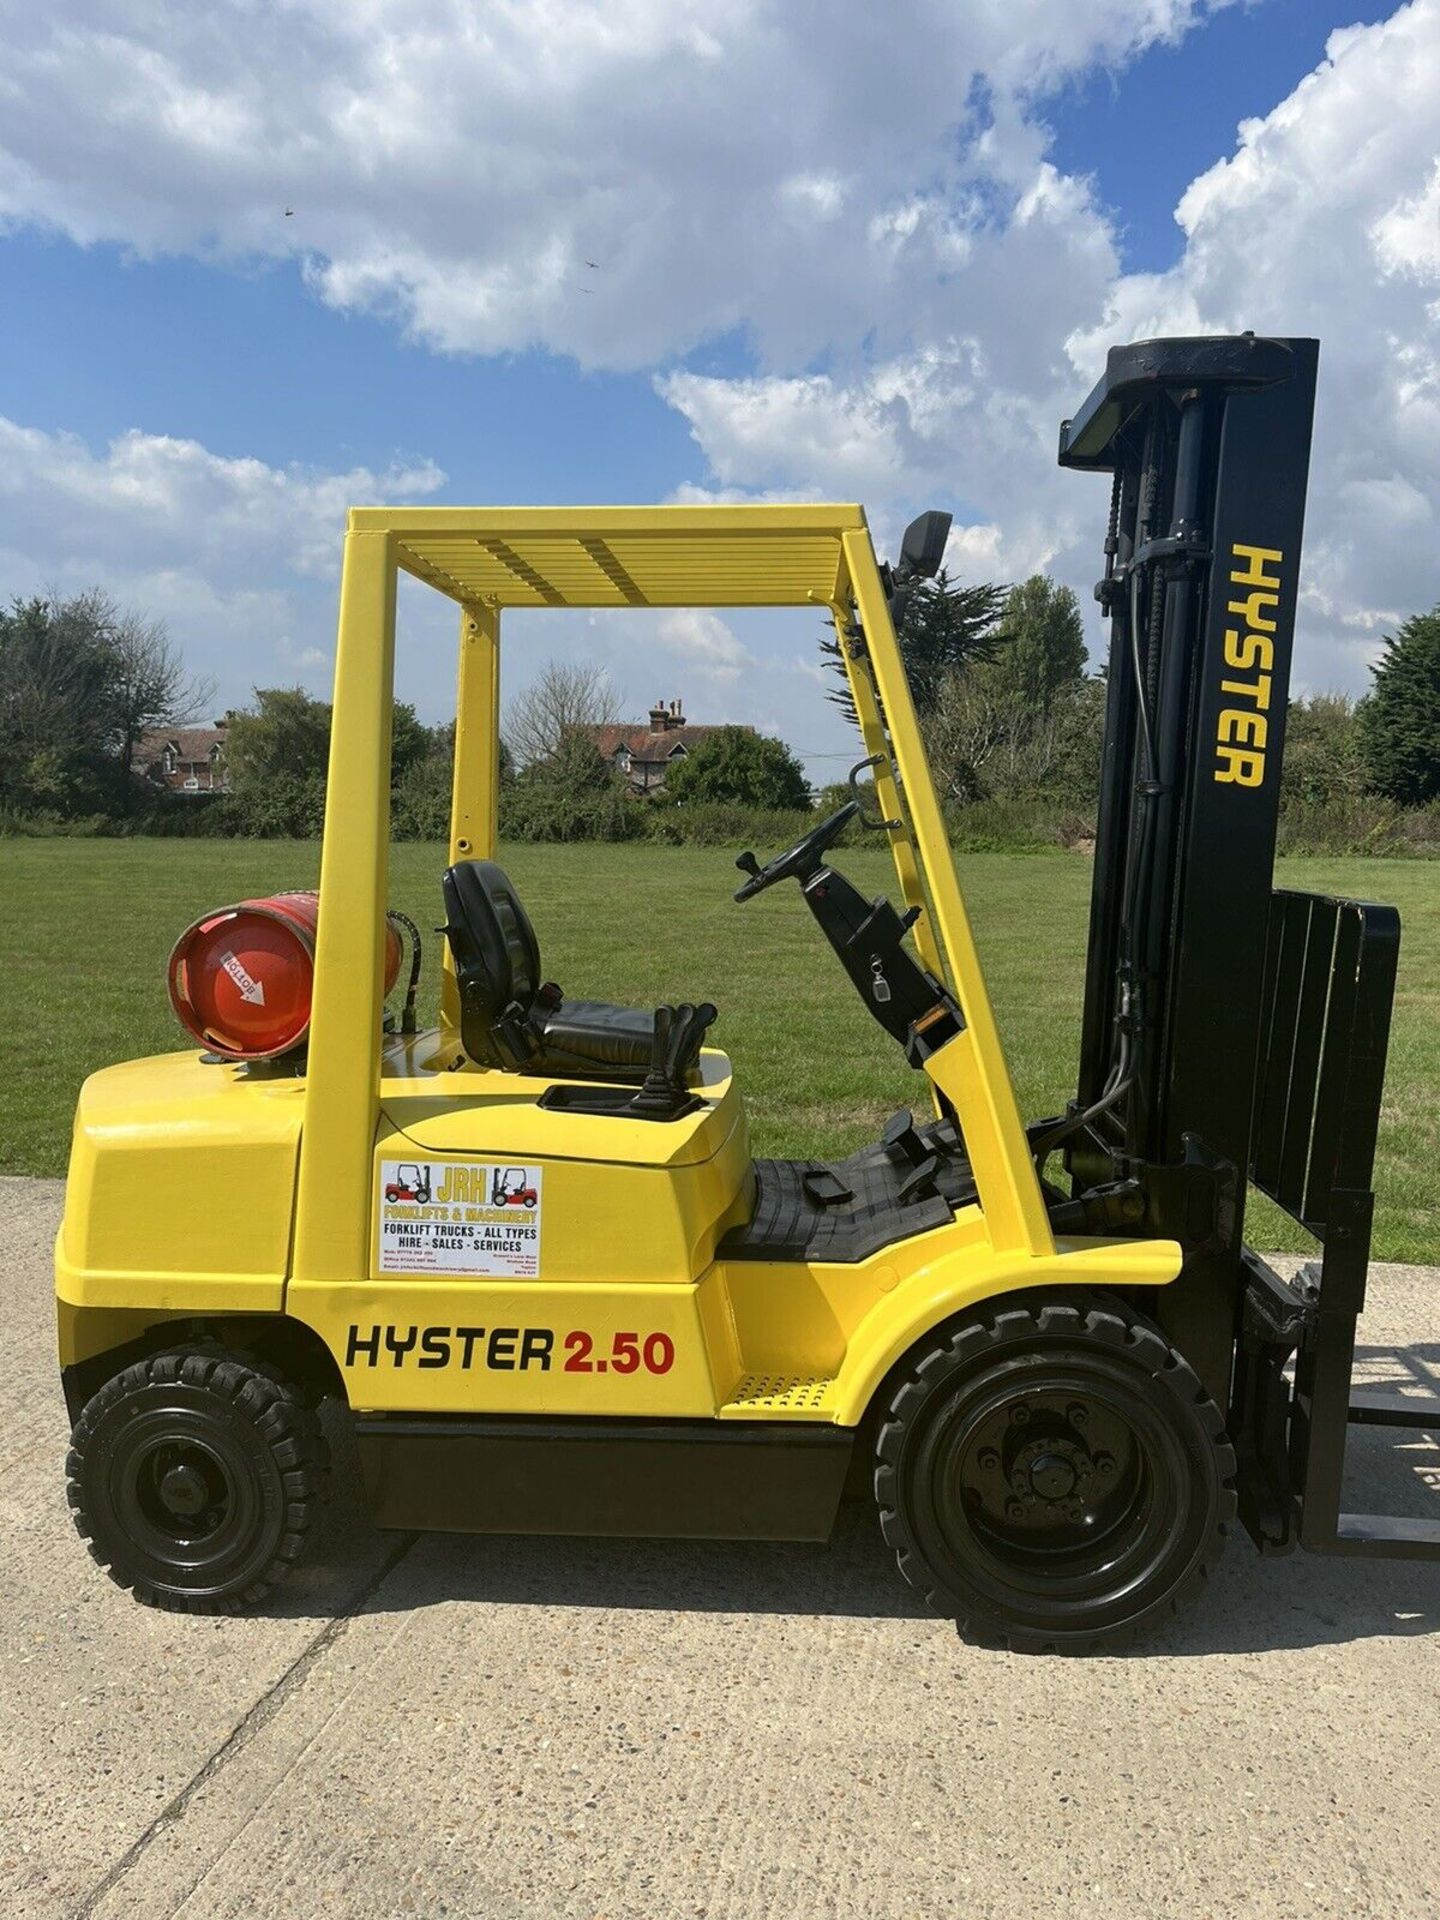 Hyster forklift truck - Image 4 of 5